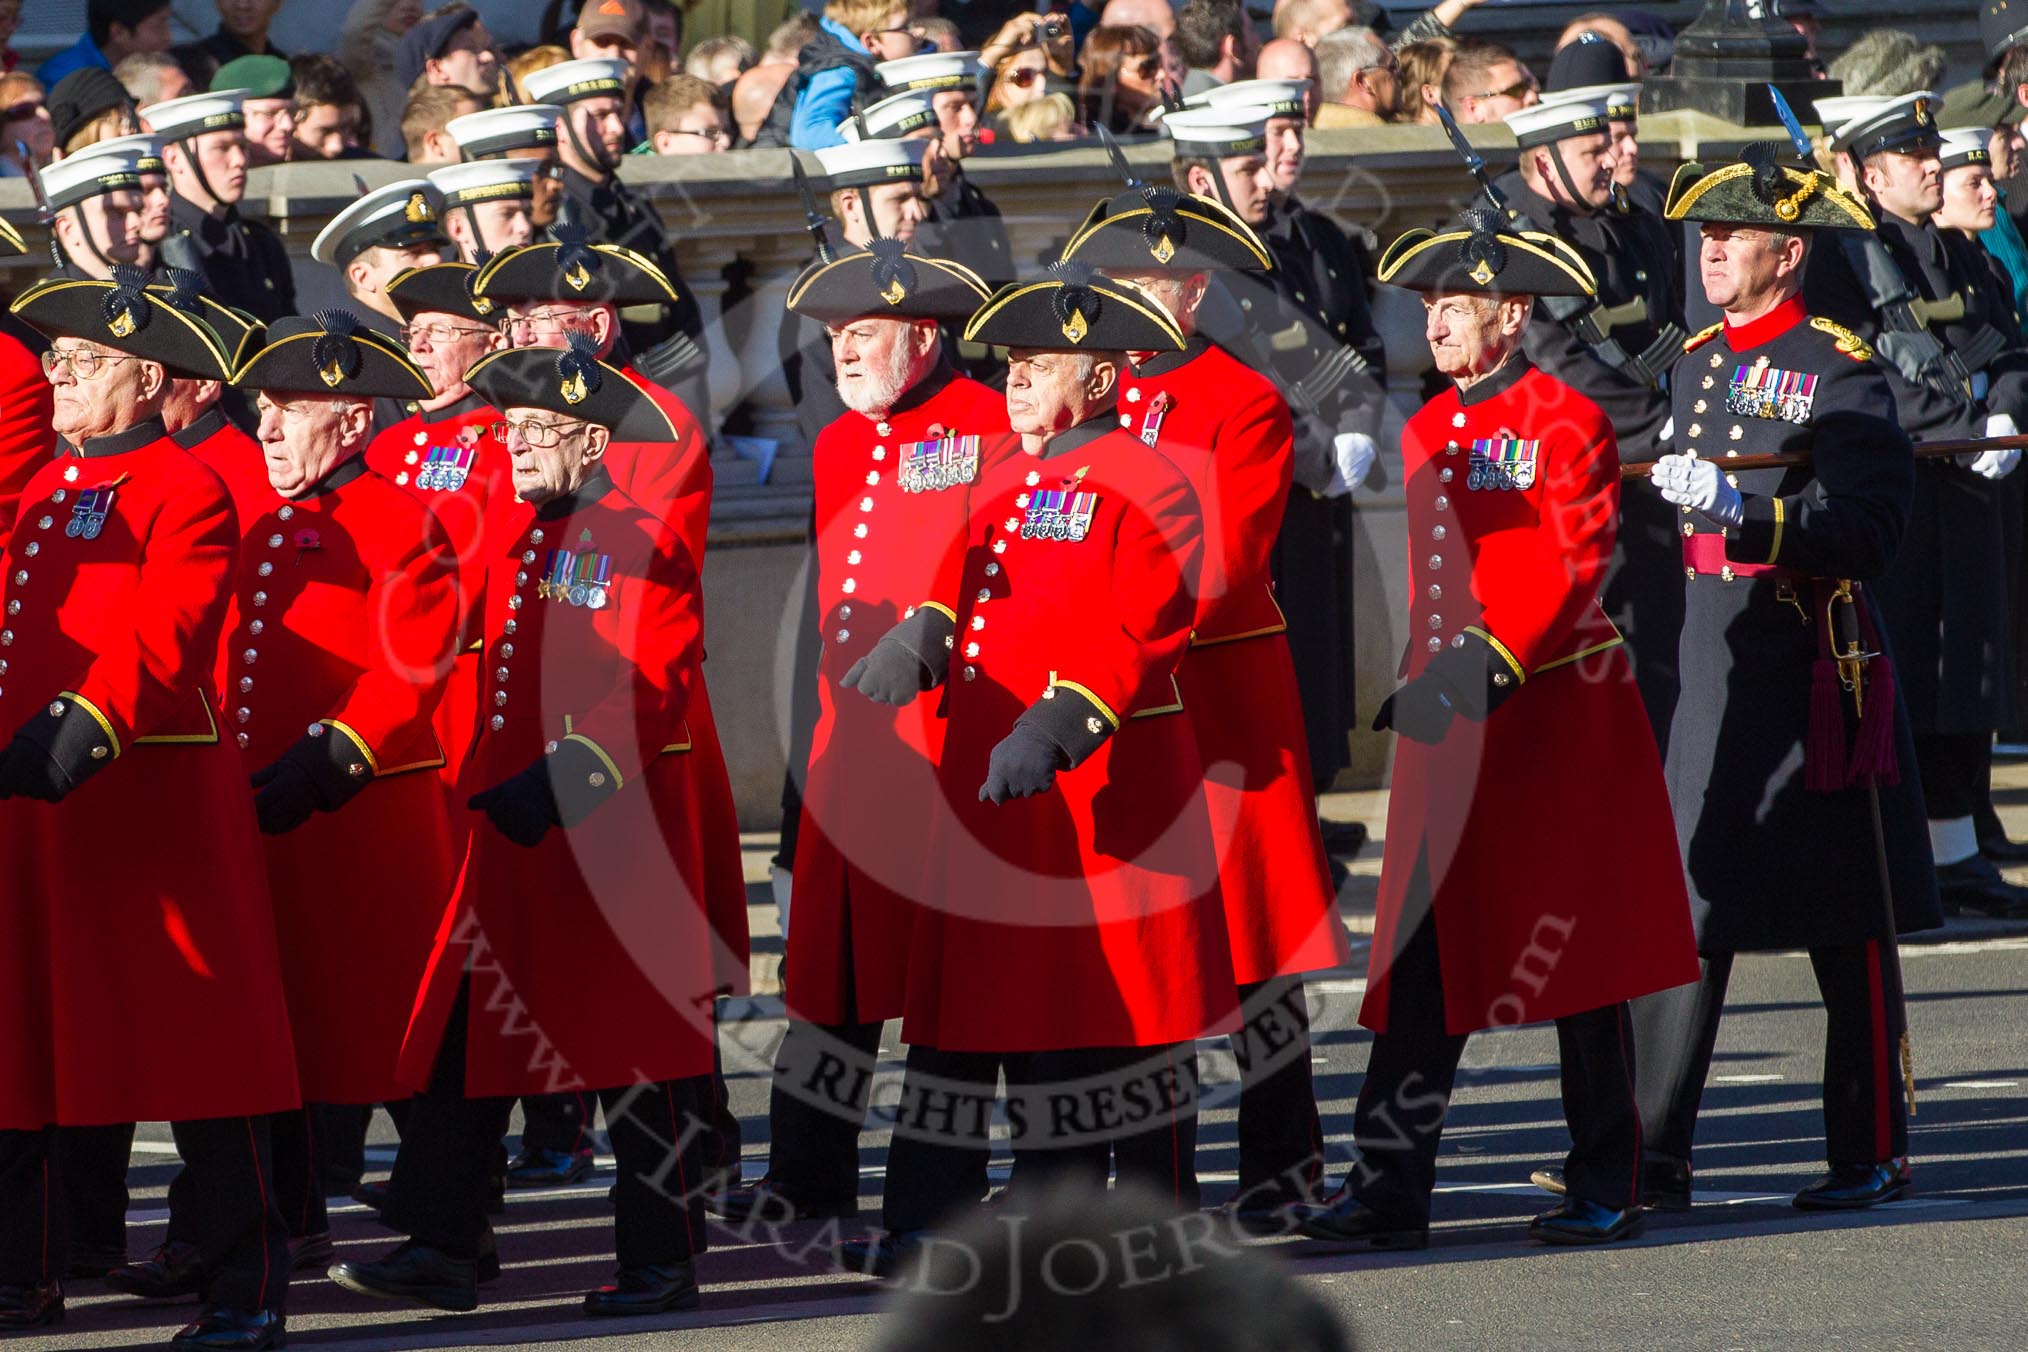 Remembrance Sunday 2012 Cenotaph March Past: Group E43 - Royal Hospital, Chelsea (Chelsea Pensioners)..
Whitehall, Cenotaph,
London SW1,

United Kingdom,
on 11 November 2012 at 11:43, image #341